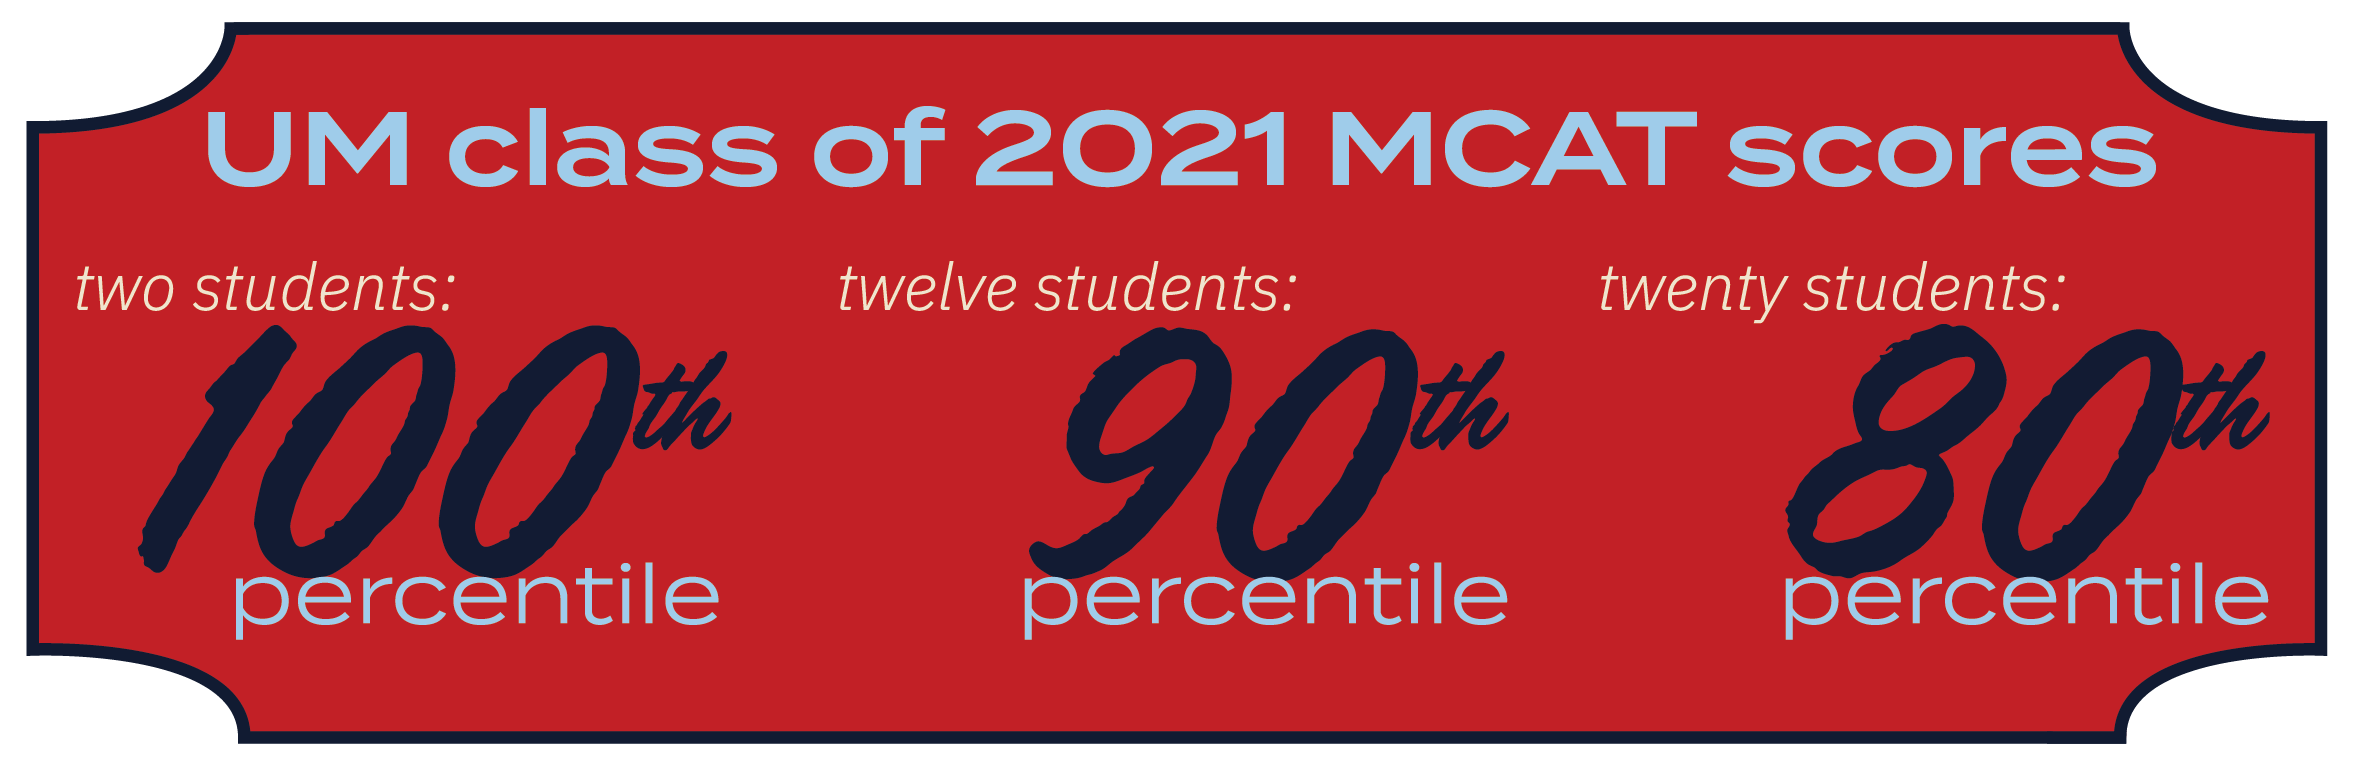 Infographic - UM class of 2021 MCAT scores - Two students: 100th percentile, Sixteen students: above 90th percentile